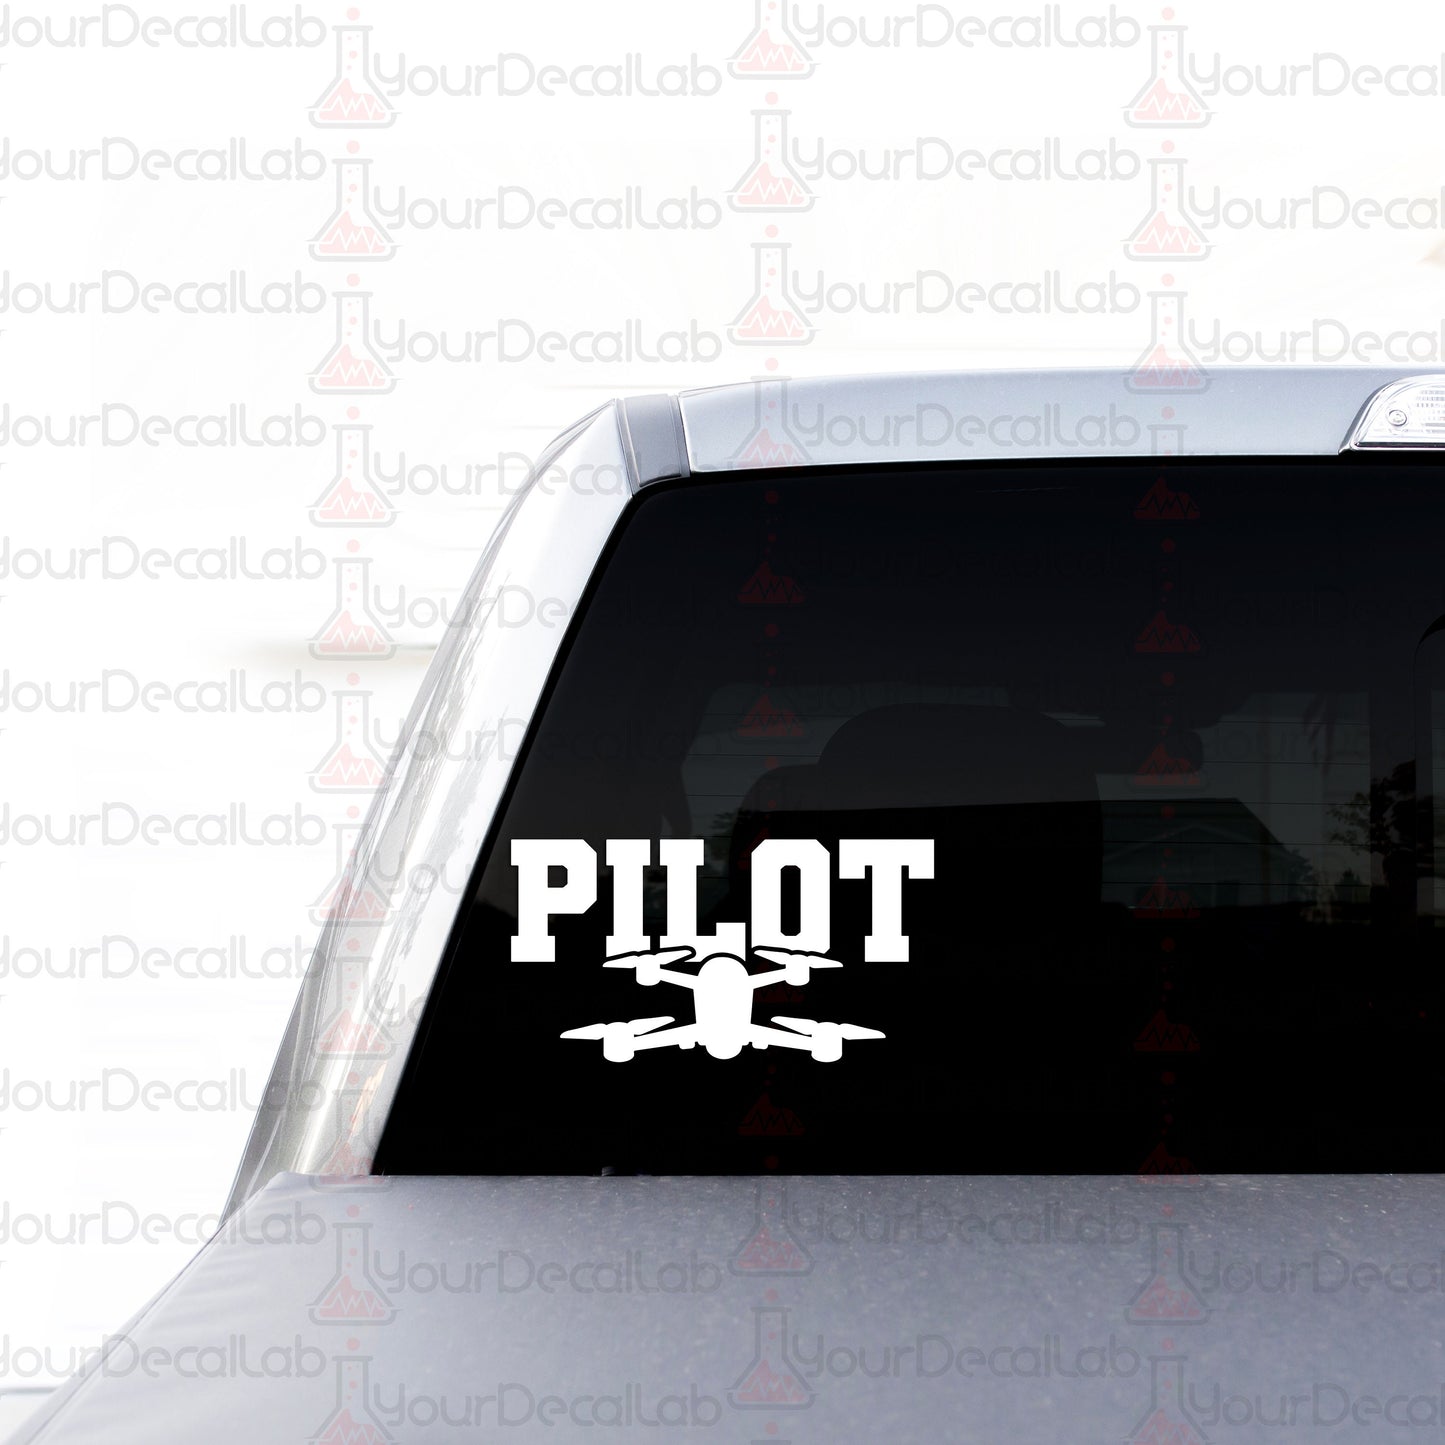 a sticker on the back of a car that says pilot